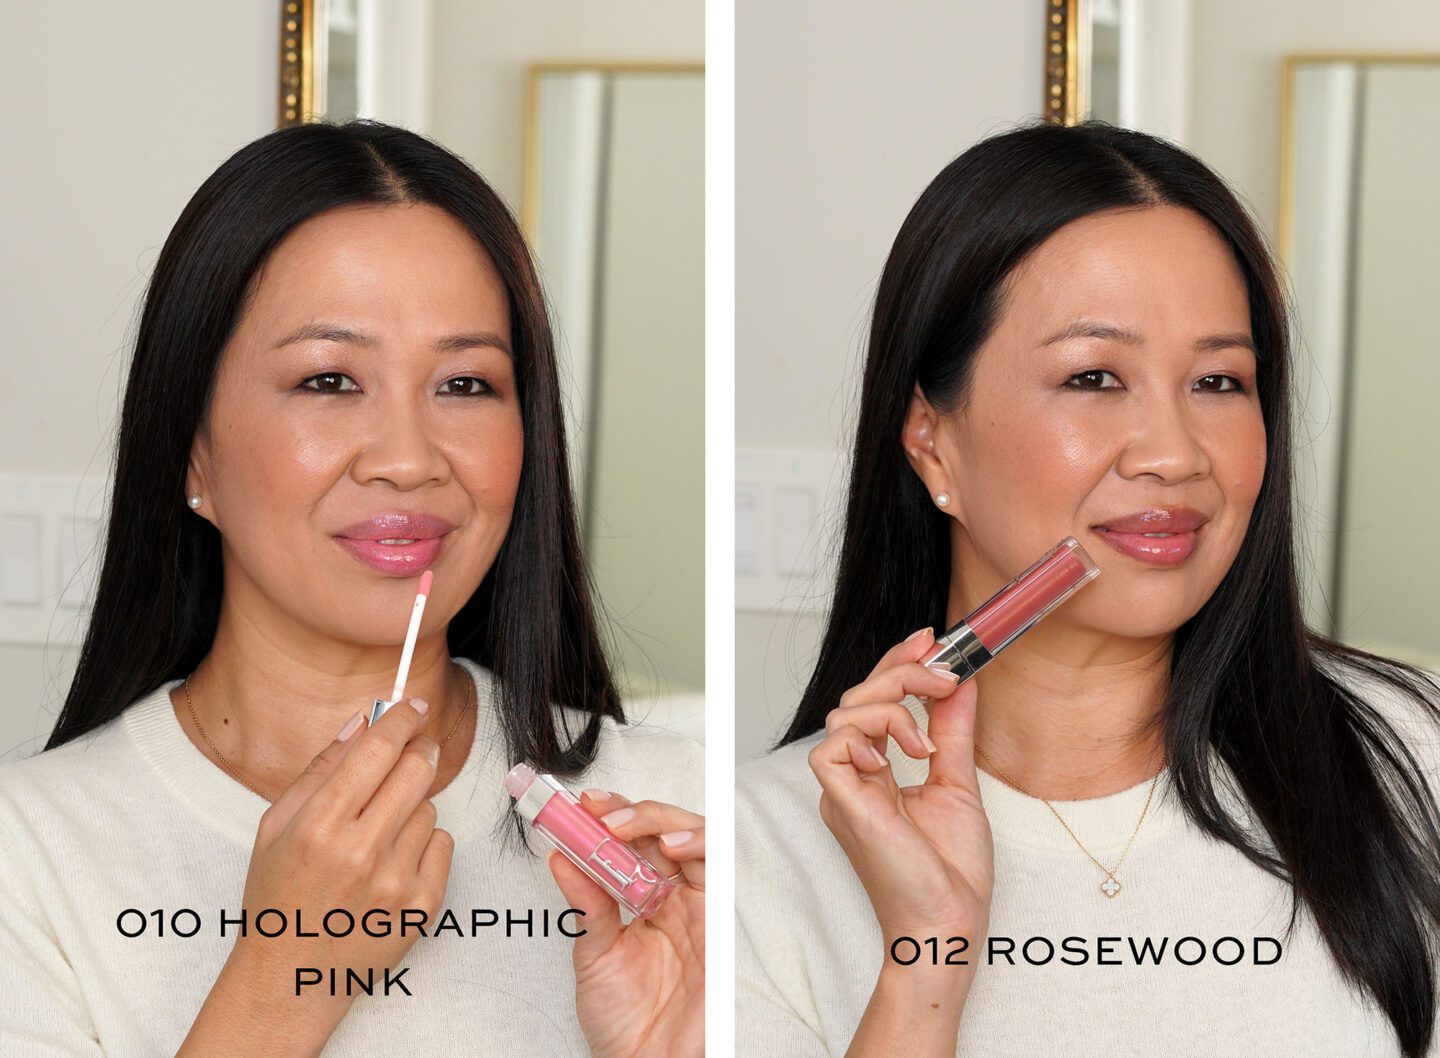 Dior Addict Lip Maximizer in 010 Holographic Pink and 012 Rosewood